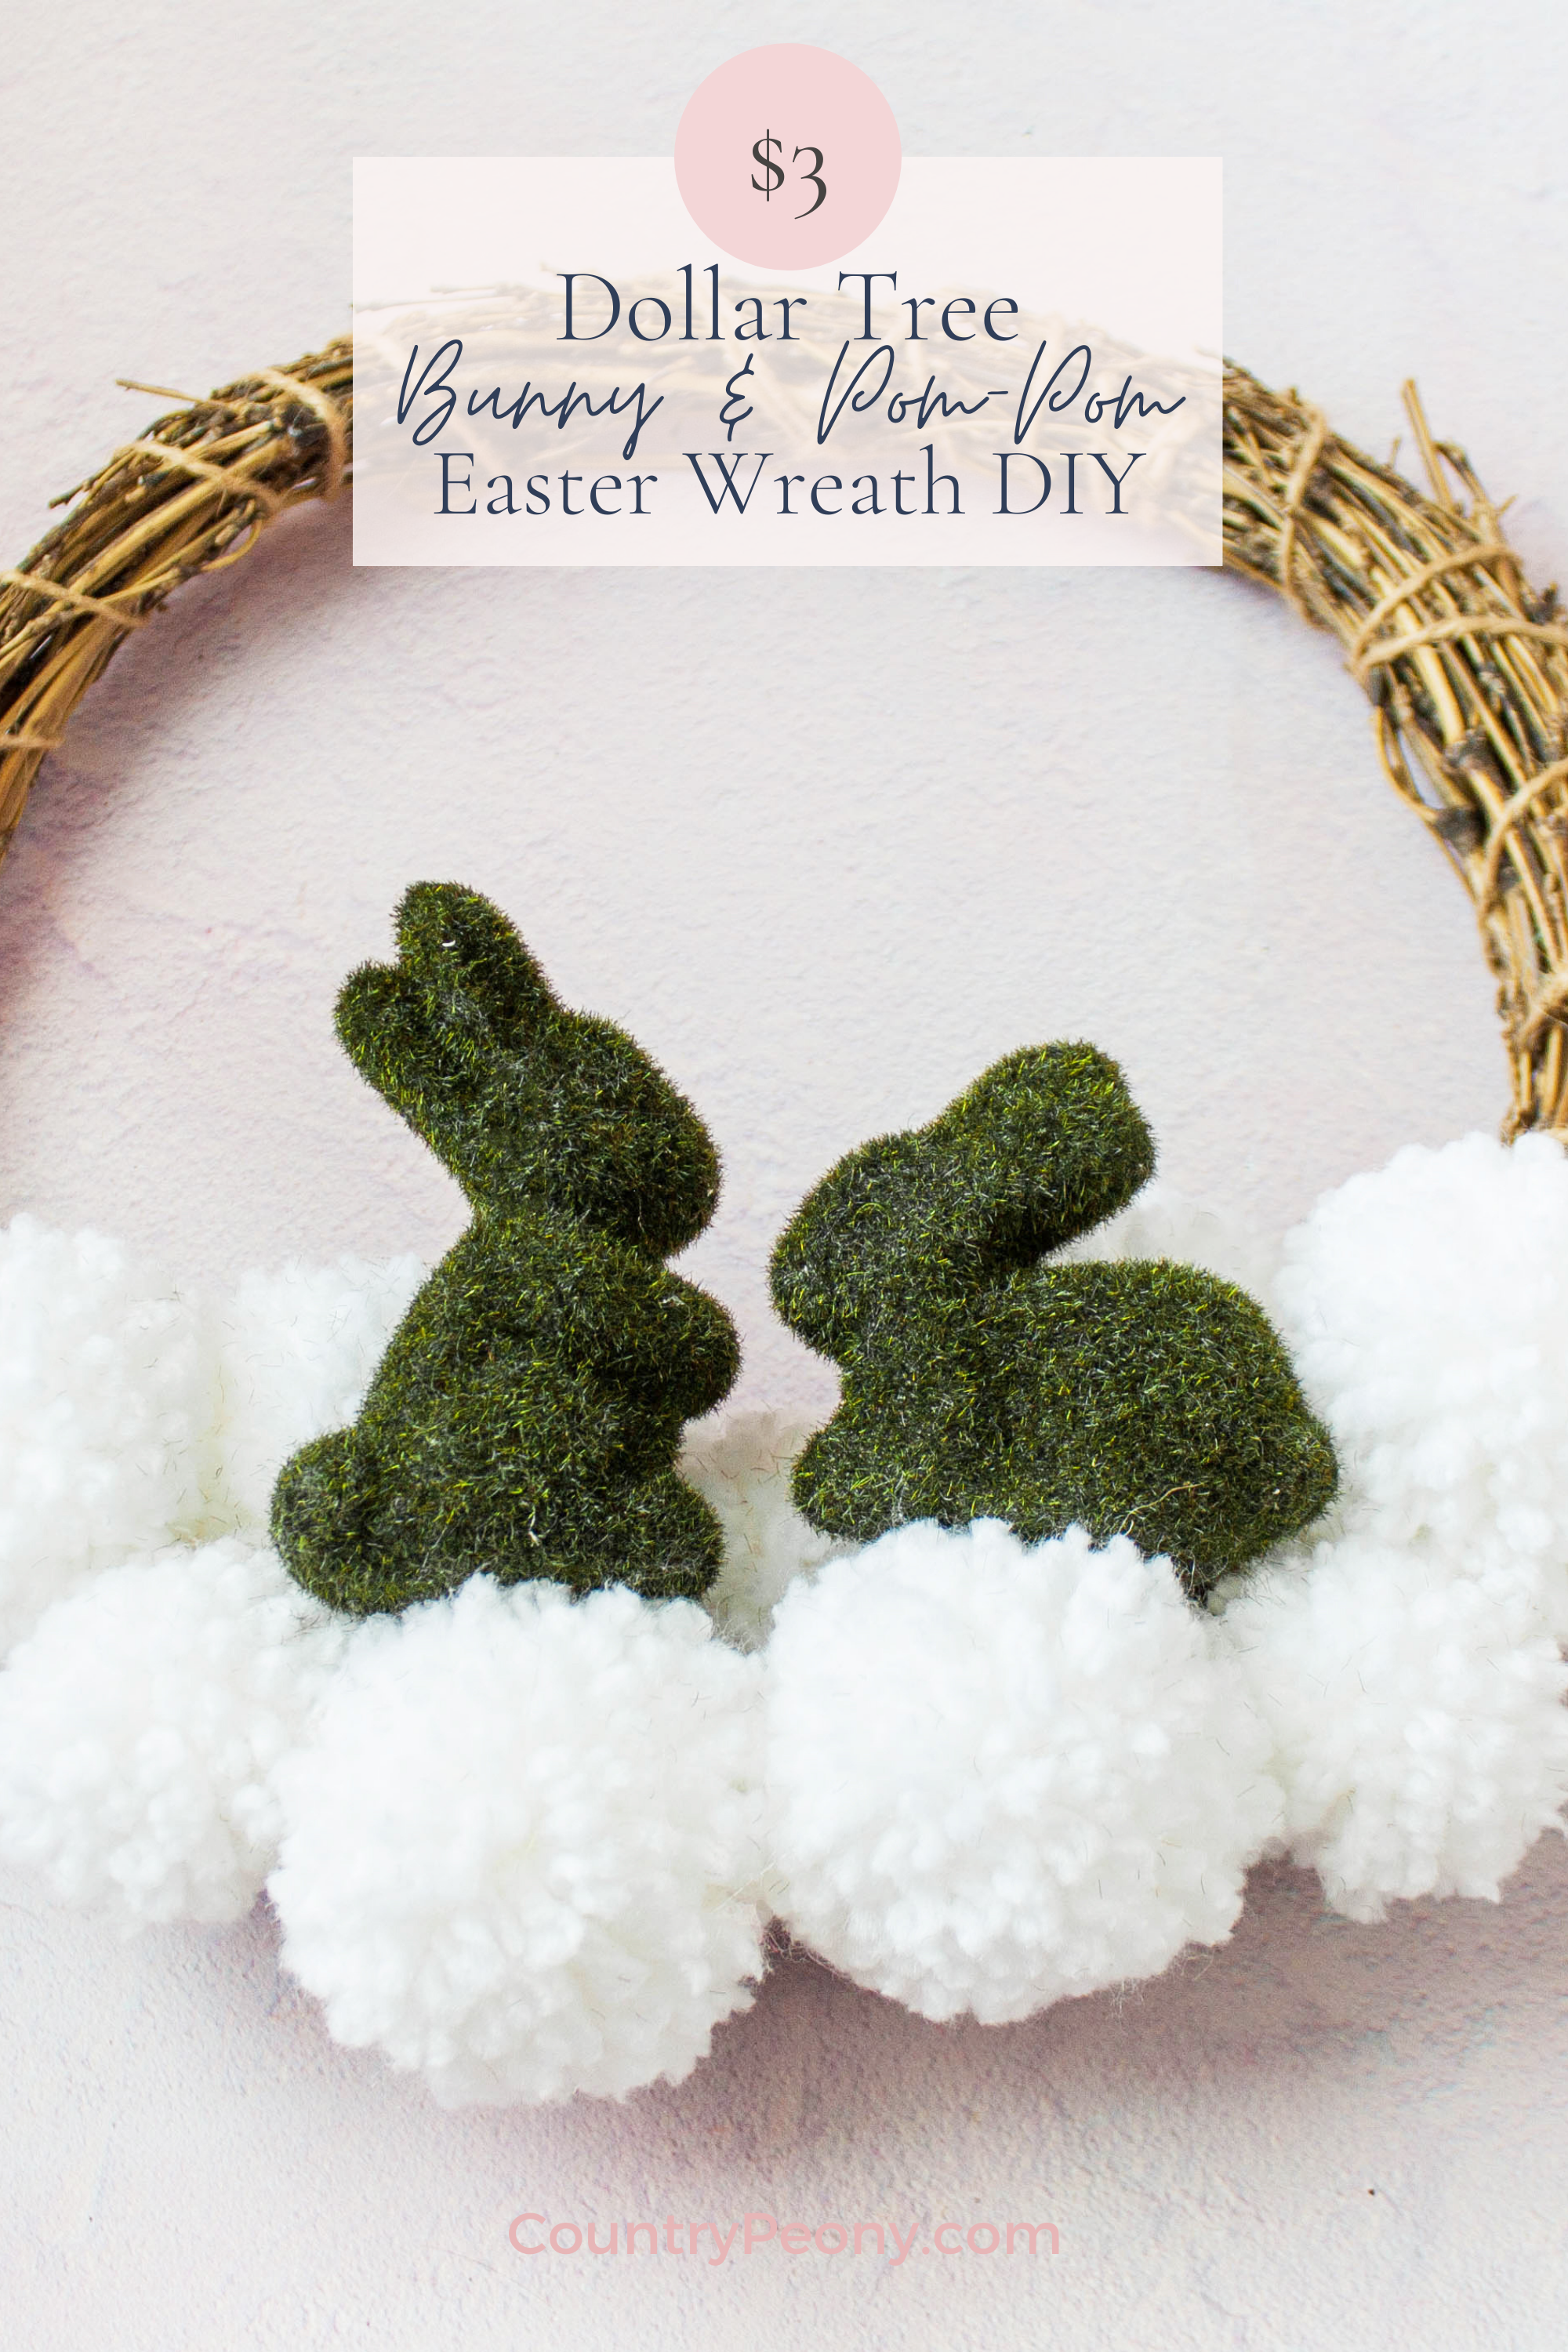 Bunny Craft: DIY Moss Covered Succulent Bunnies for Spring - Family Spice